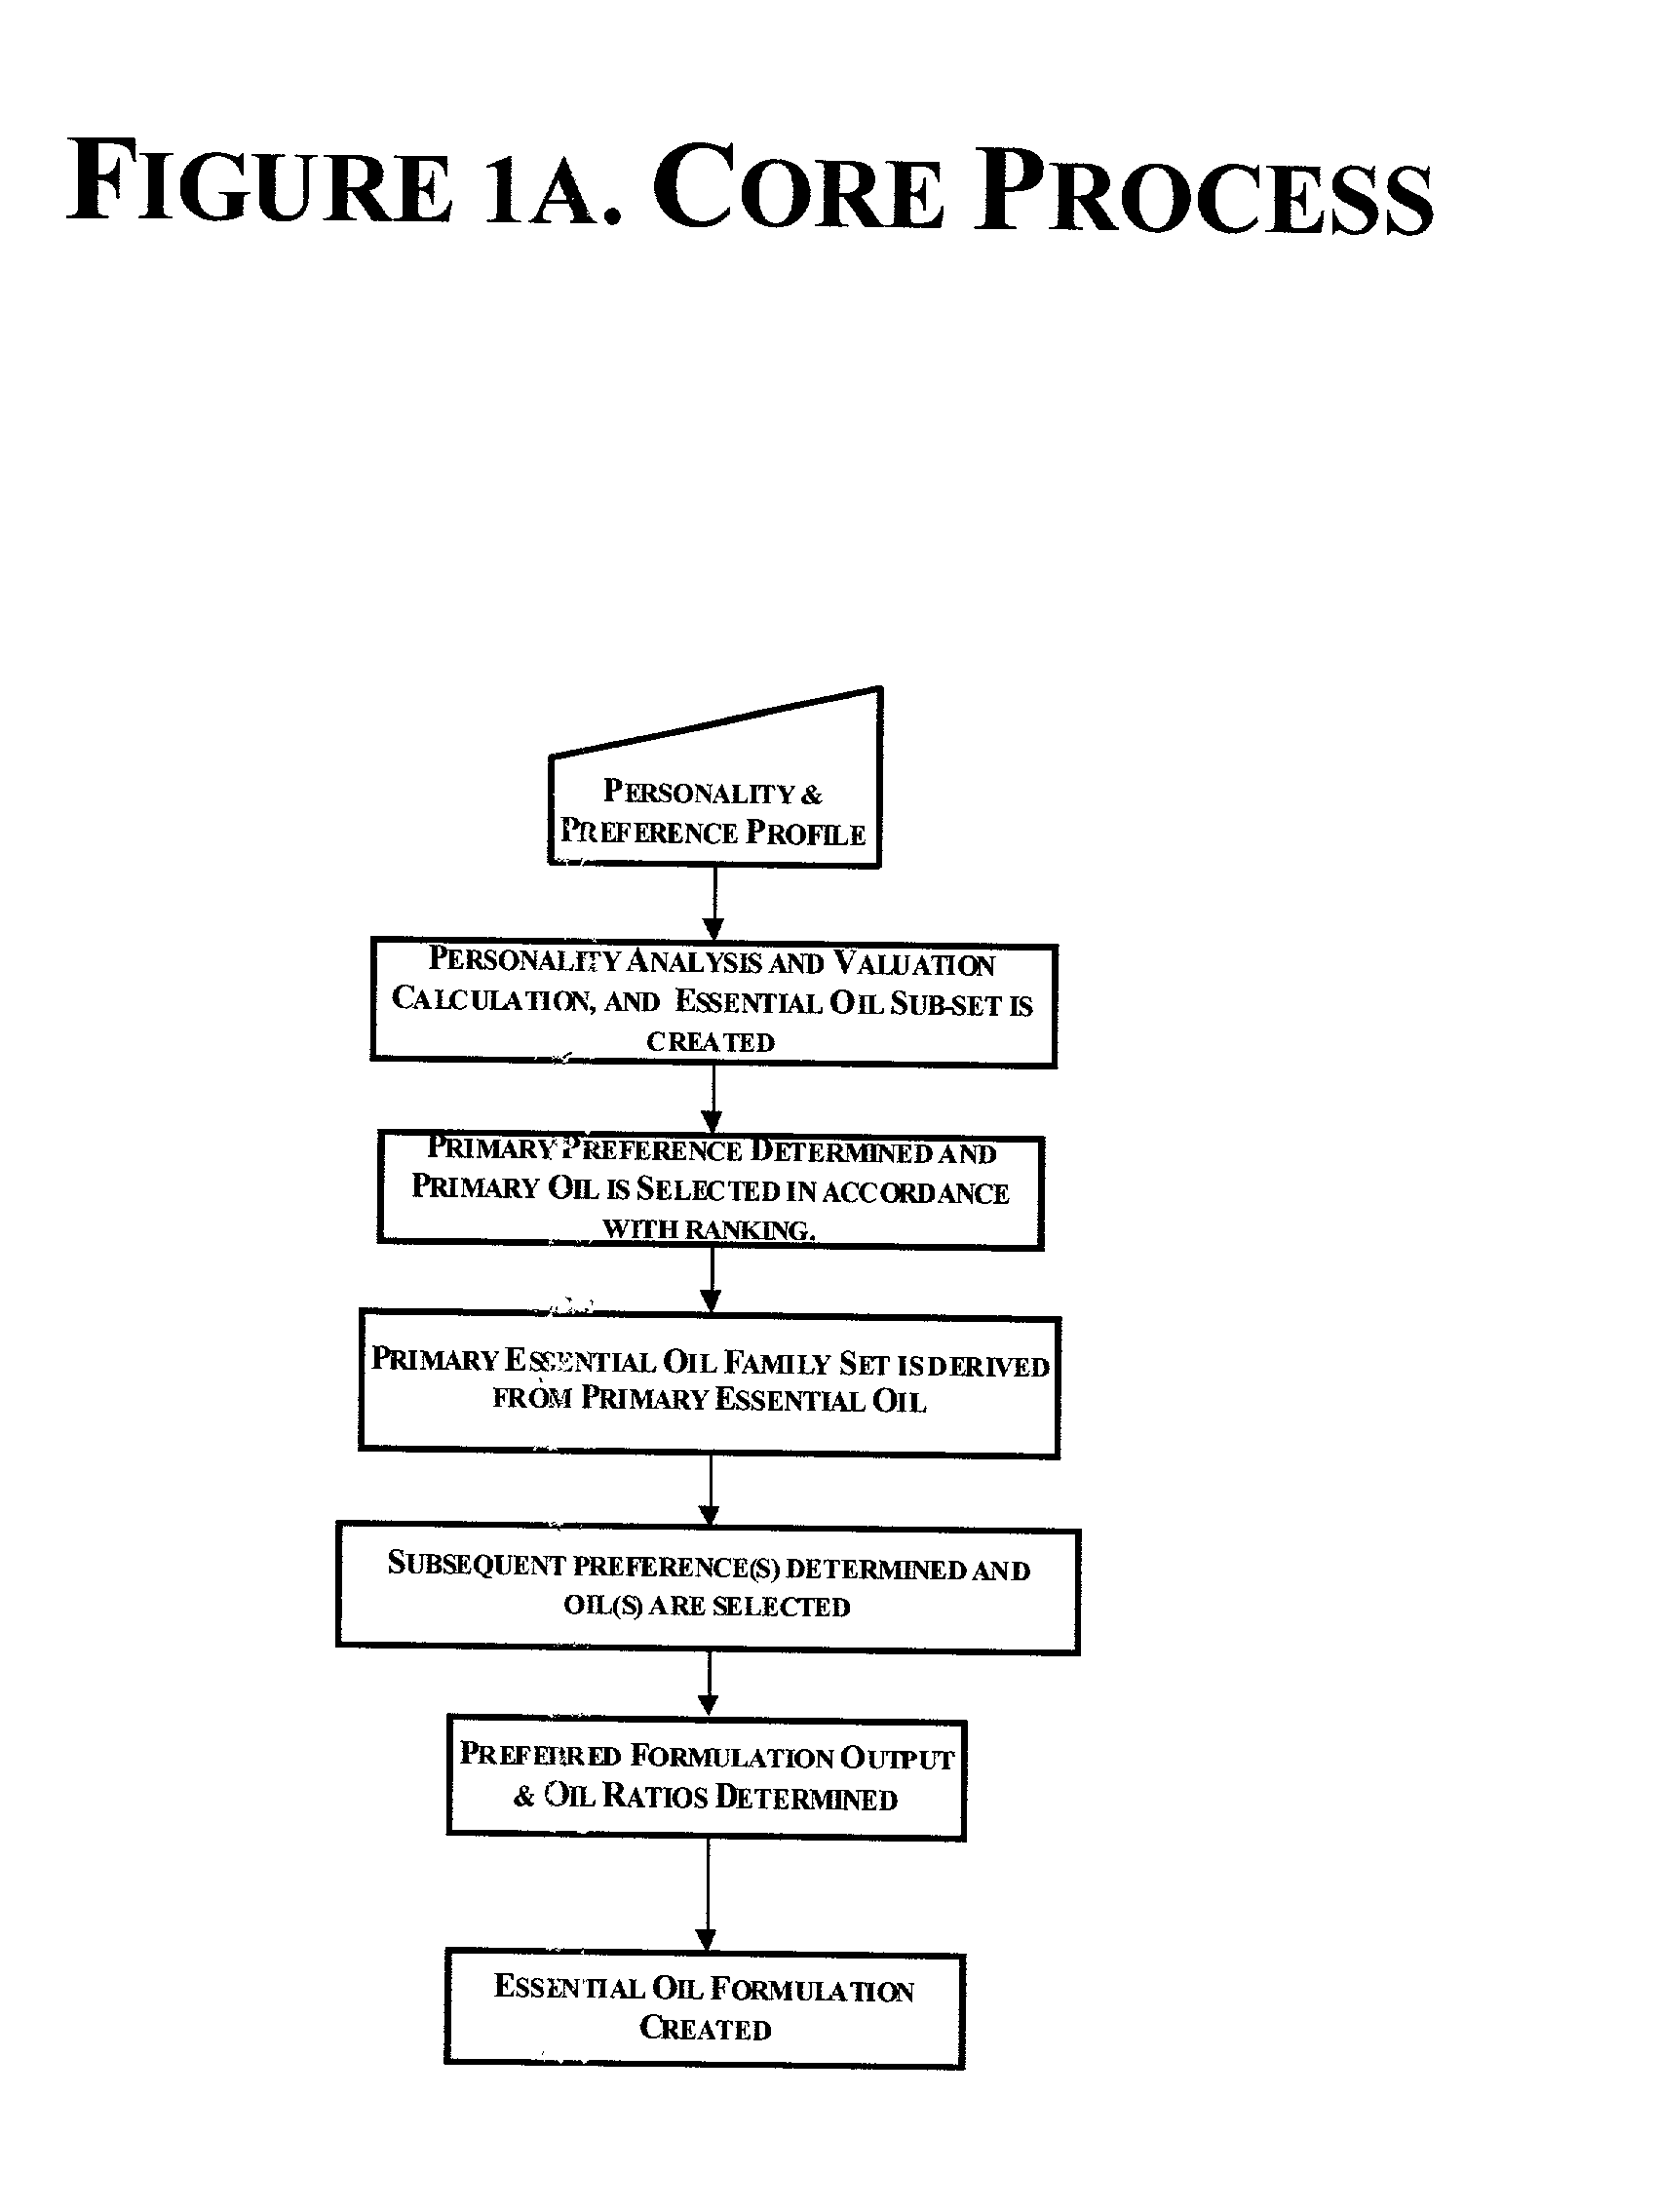 Method, apparatus, and system for customizing essential oil formulations